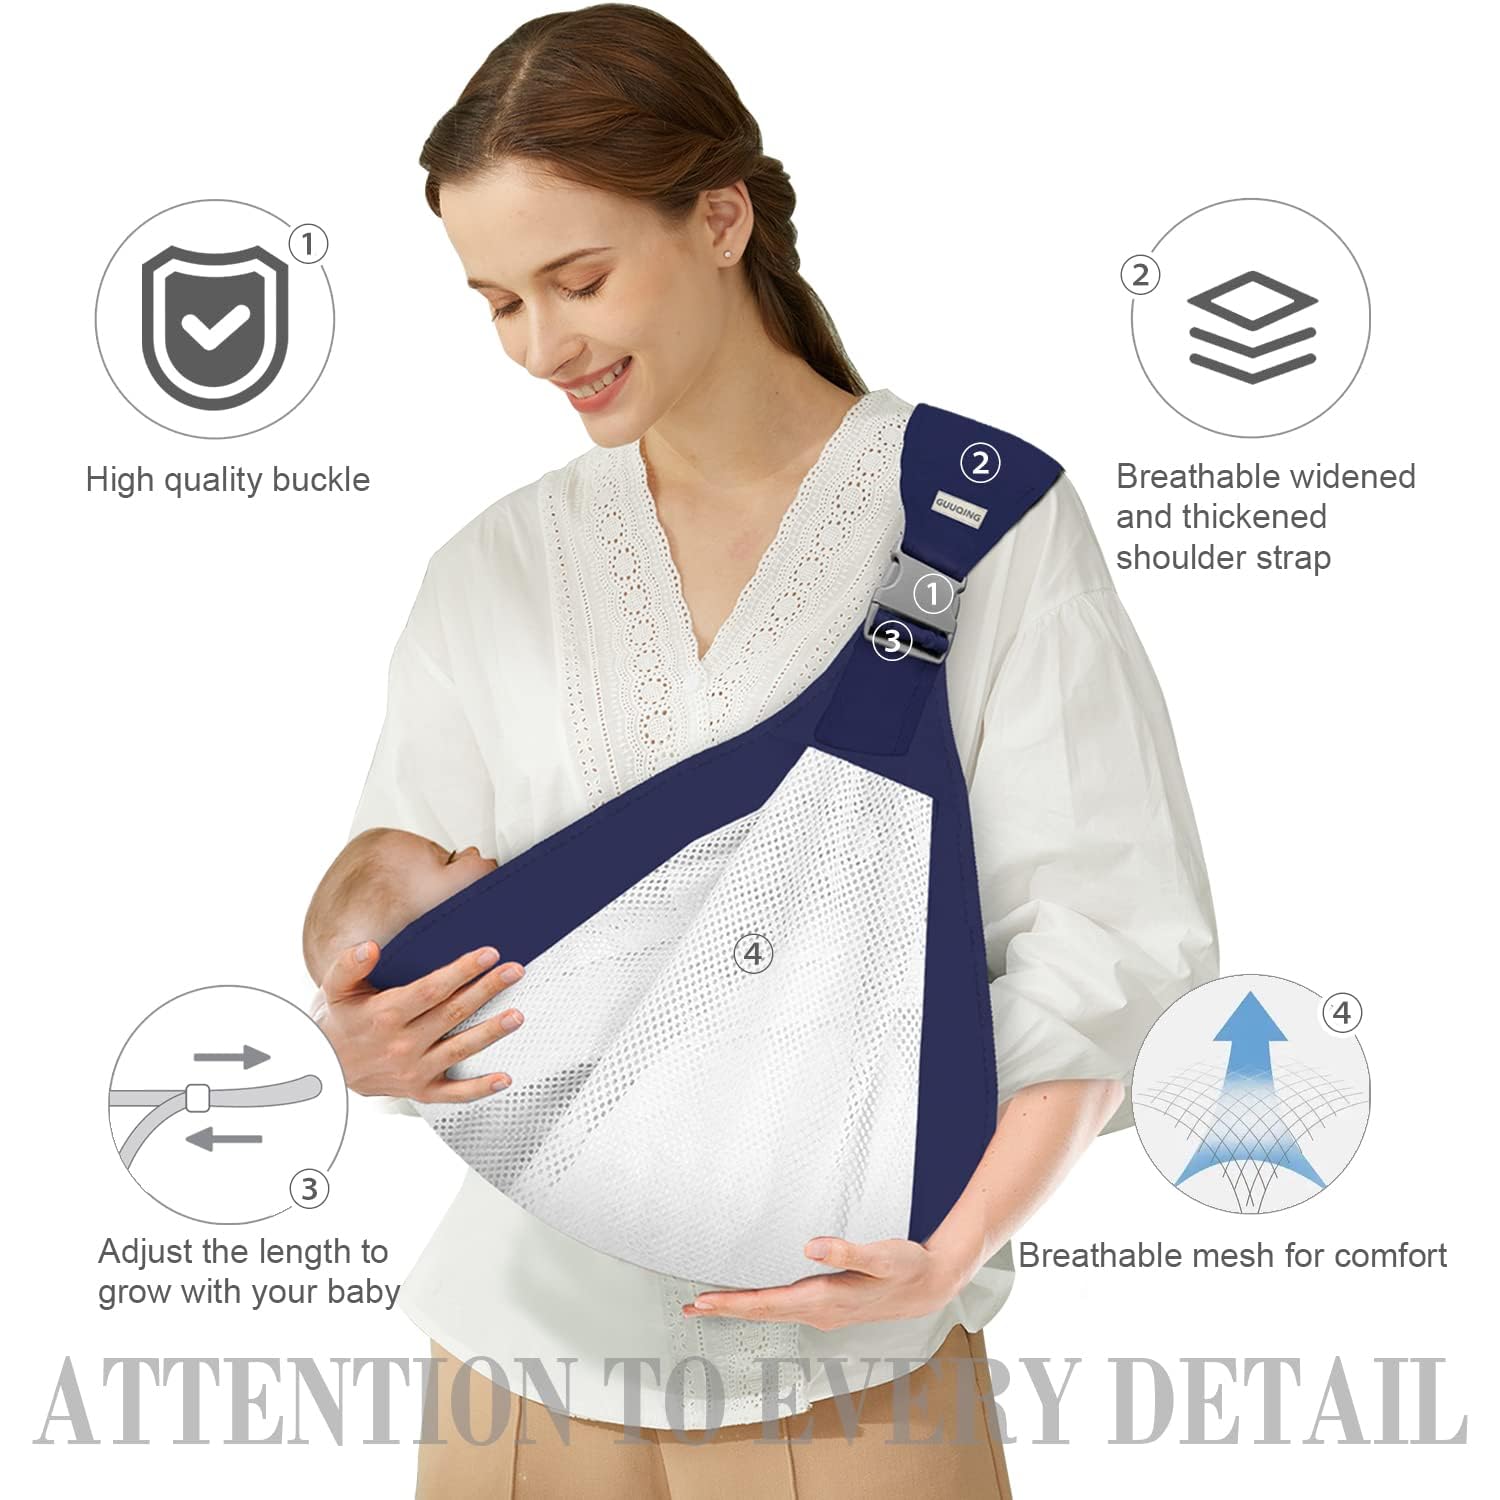 Versatile and Comfortable Baby Carrier for 0-36 Months - Ergonomic 3D Mesh Wrap with Adjustable Sling Straps